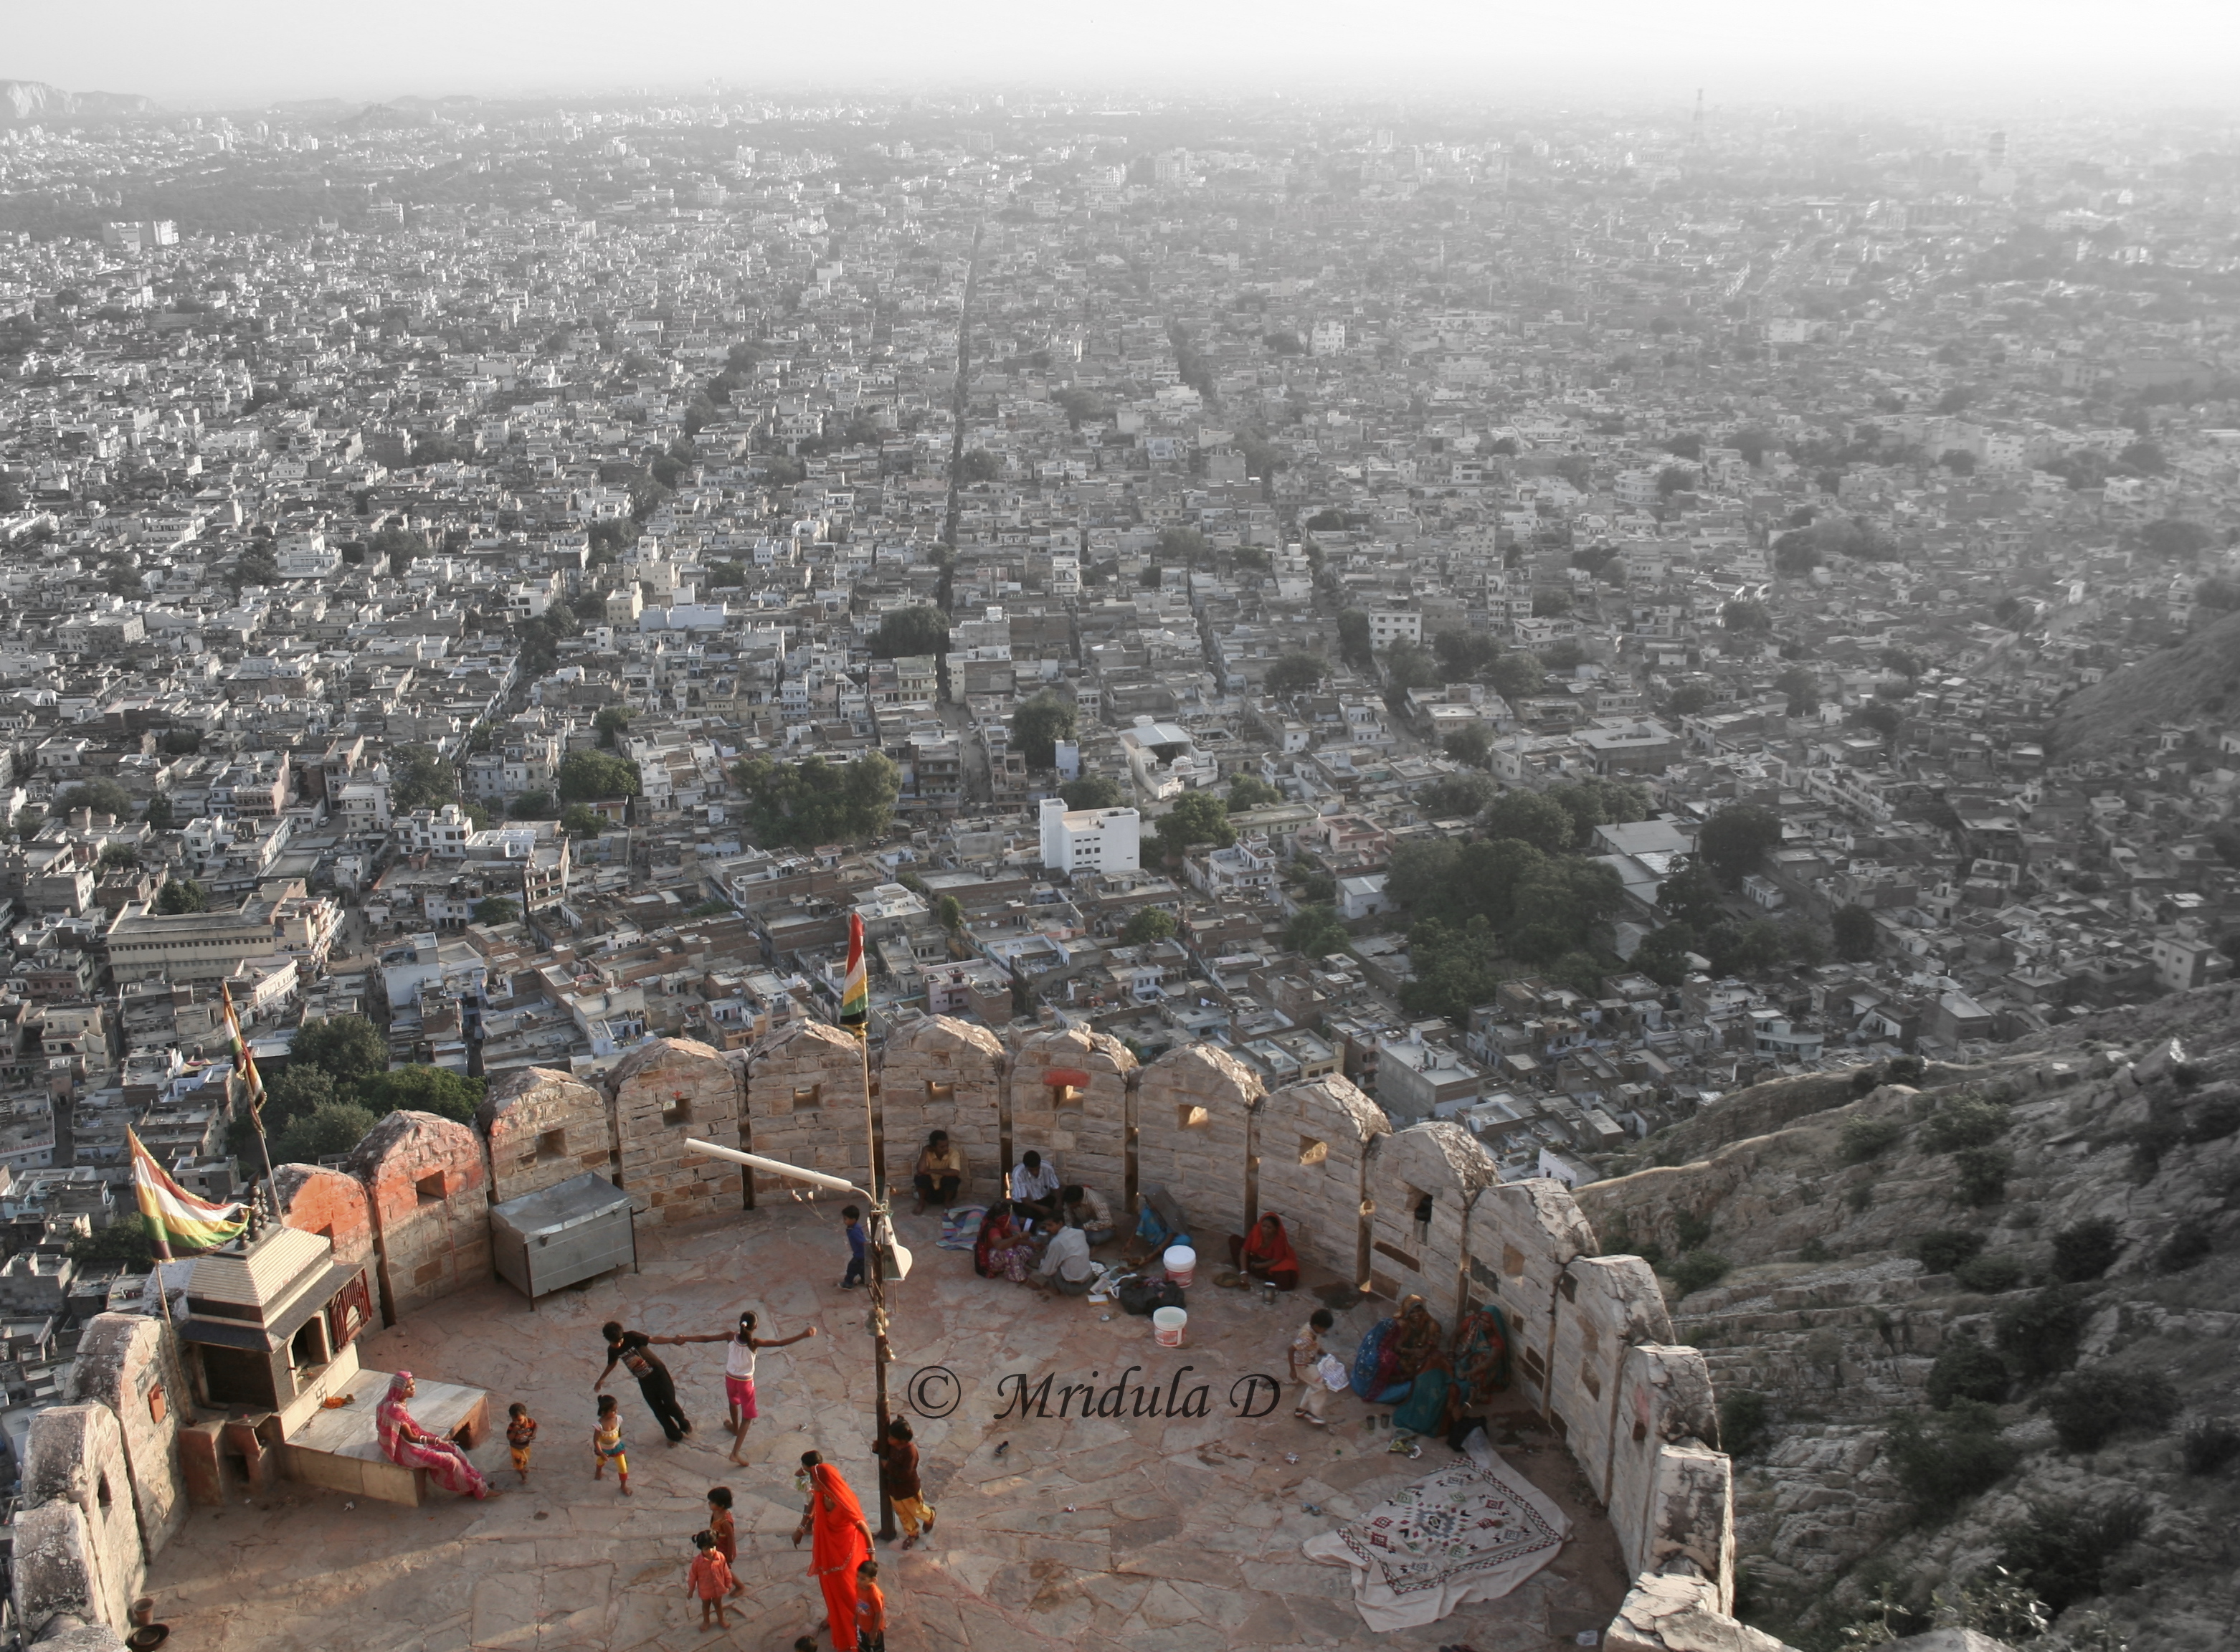 A View of Jaipur City from Nahargarh Fort